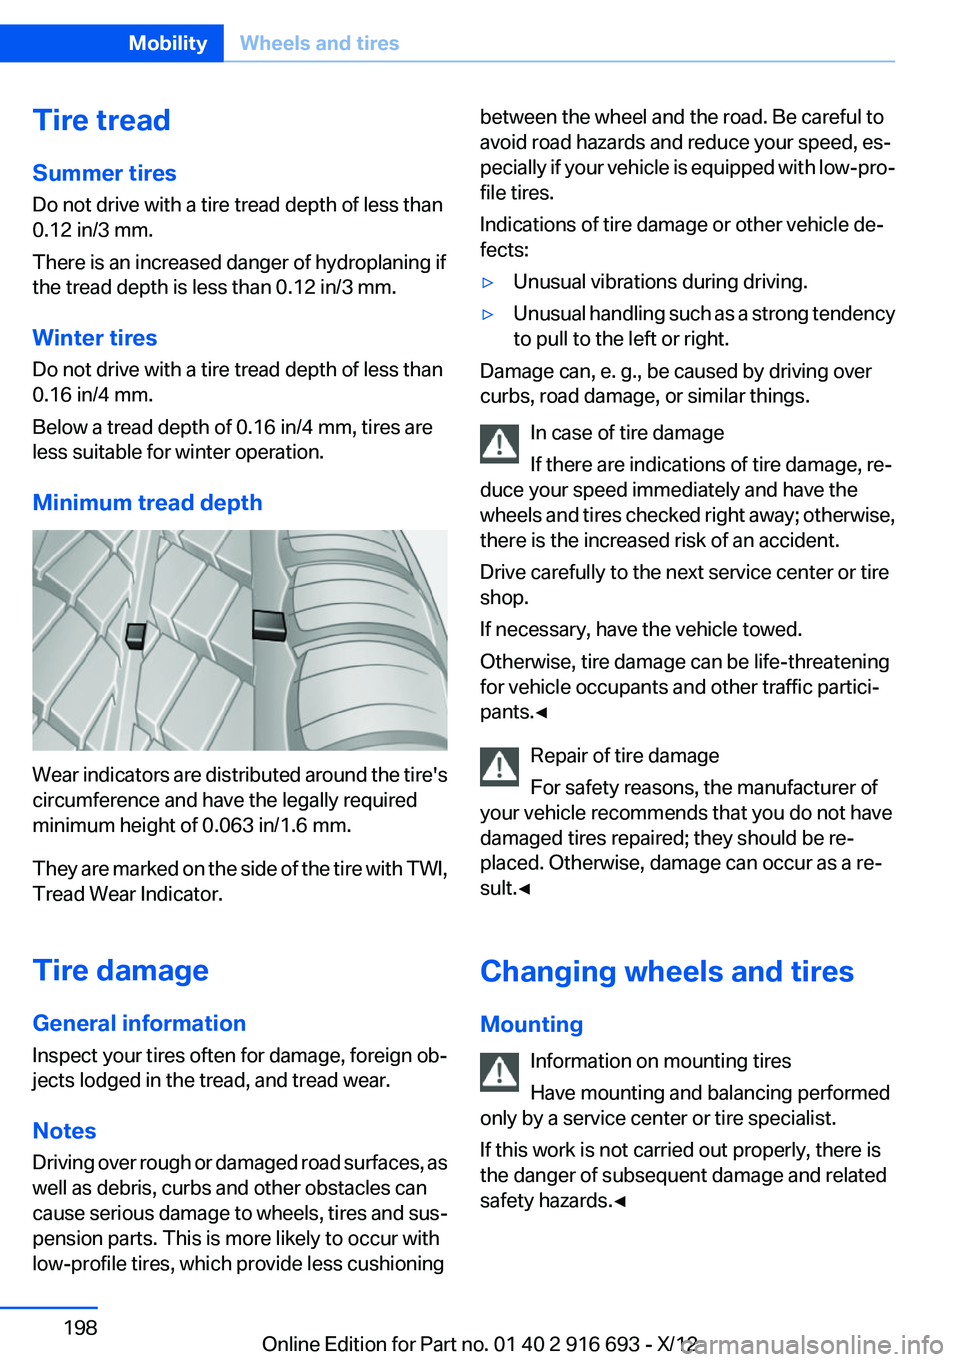 BMW 750I 2013  Owners Manual Tire tread
Summer tires
Do not drive with a tire tread depth of less than
0.12 in/3 mm.
There is an increased danger of hydroplaning if
the tread depth is less than 0.12 in/3 mm.
Winter tires
Do not d